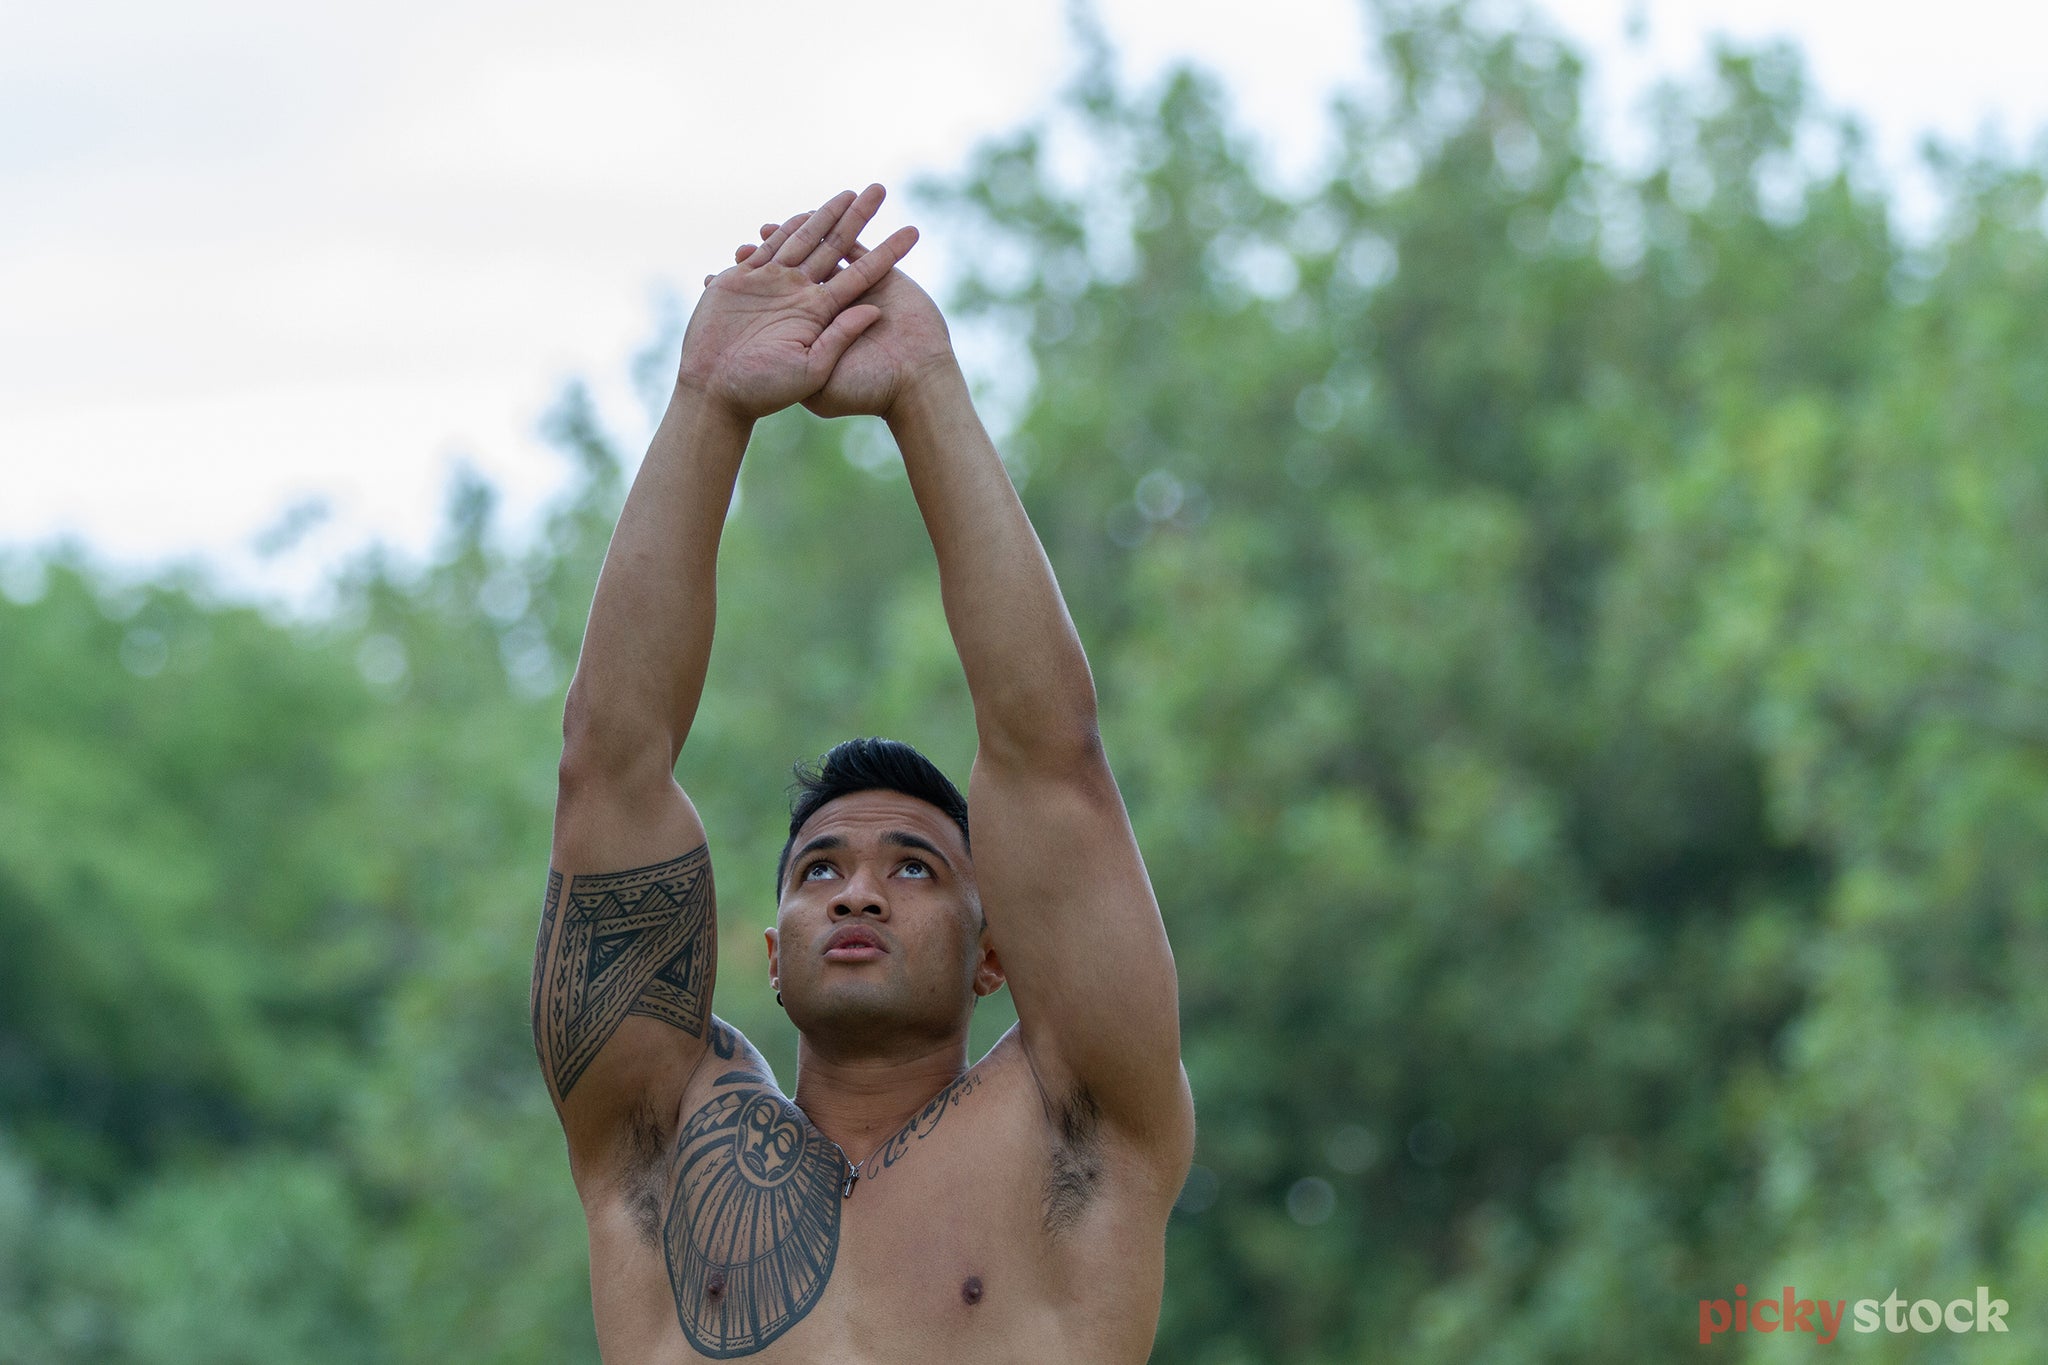 Polynesian man with arms outstretched above his head, gazes up towards his head in a moment of exerice. Shirtless, his traditional tattoos can be seen on his upper right chest, shoulder and wrapping around his bicep. He stands in what looks to be a park, which is out of focus. 